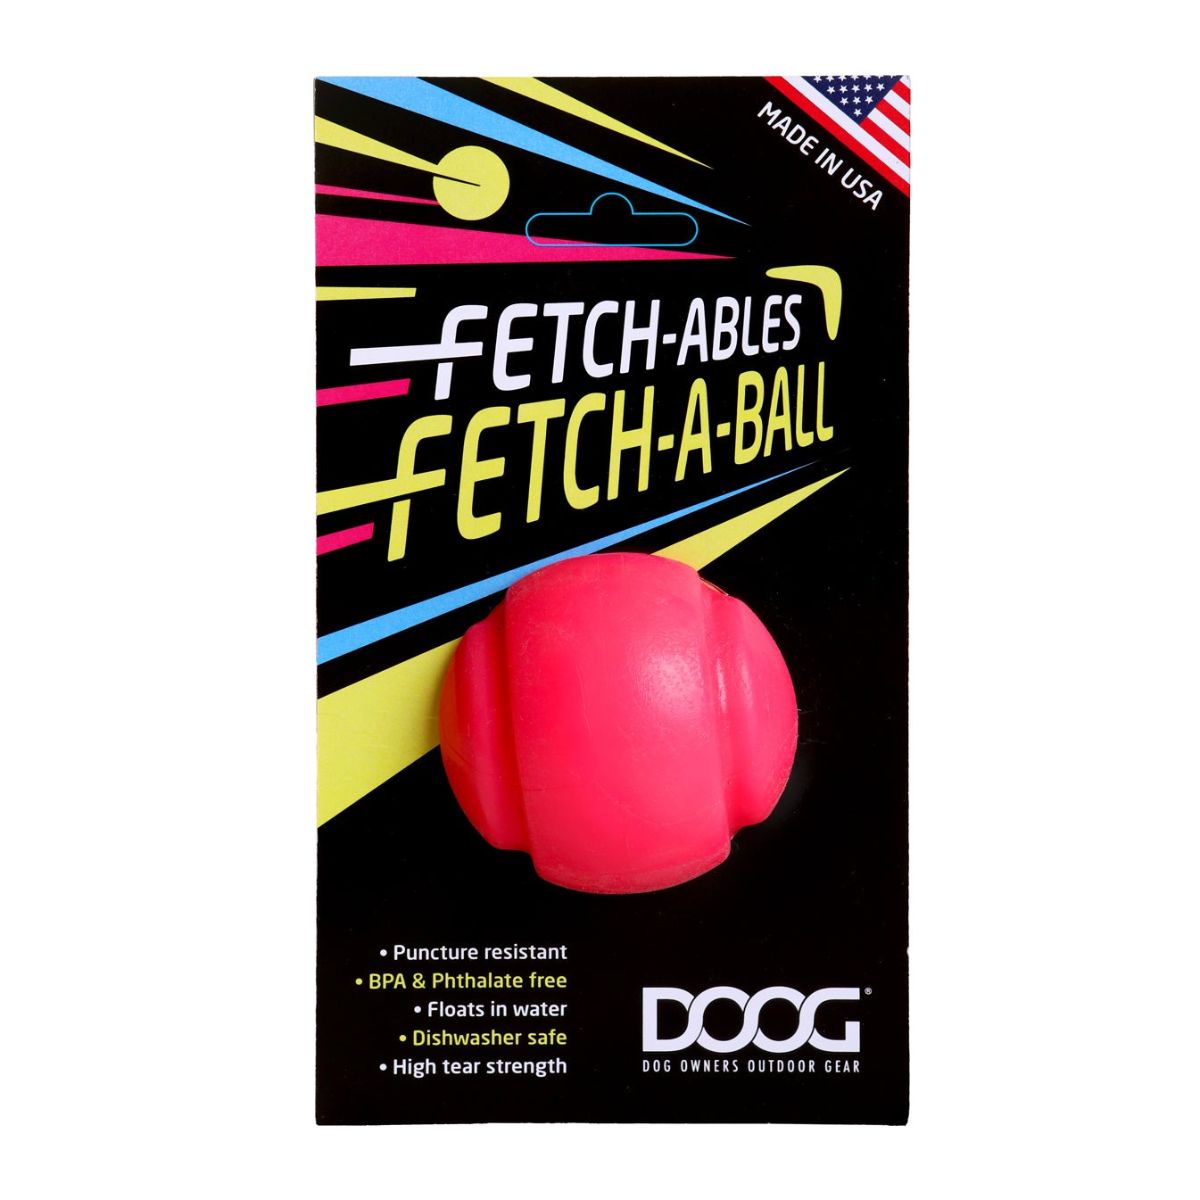 DOOG Pet Products Fetch-ables Fetch-A-Ball Dog Toy